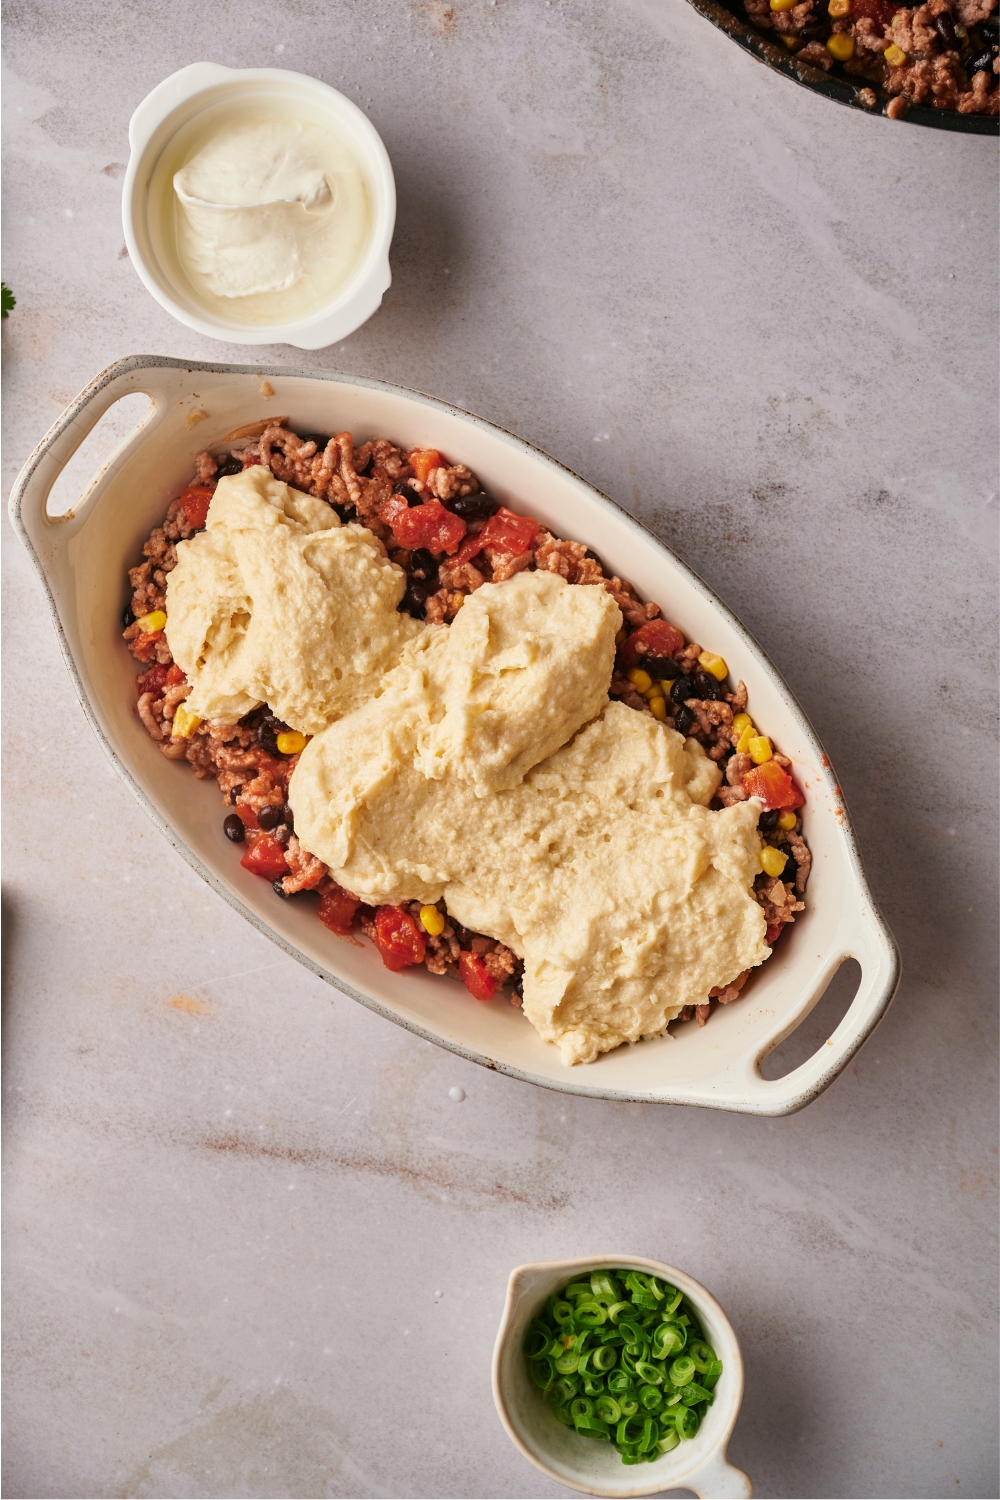 Cornbread batter on top of a ground beef mixture in a casserole dish.